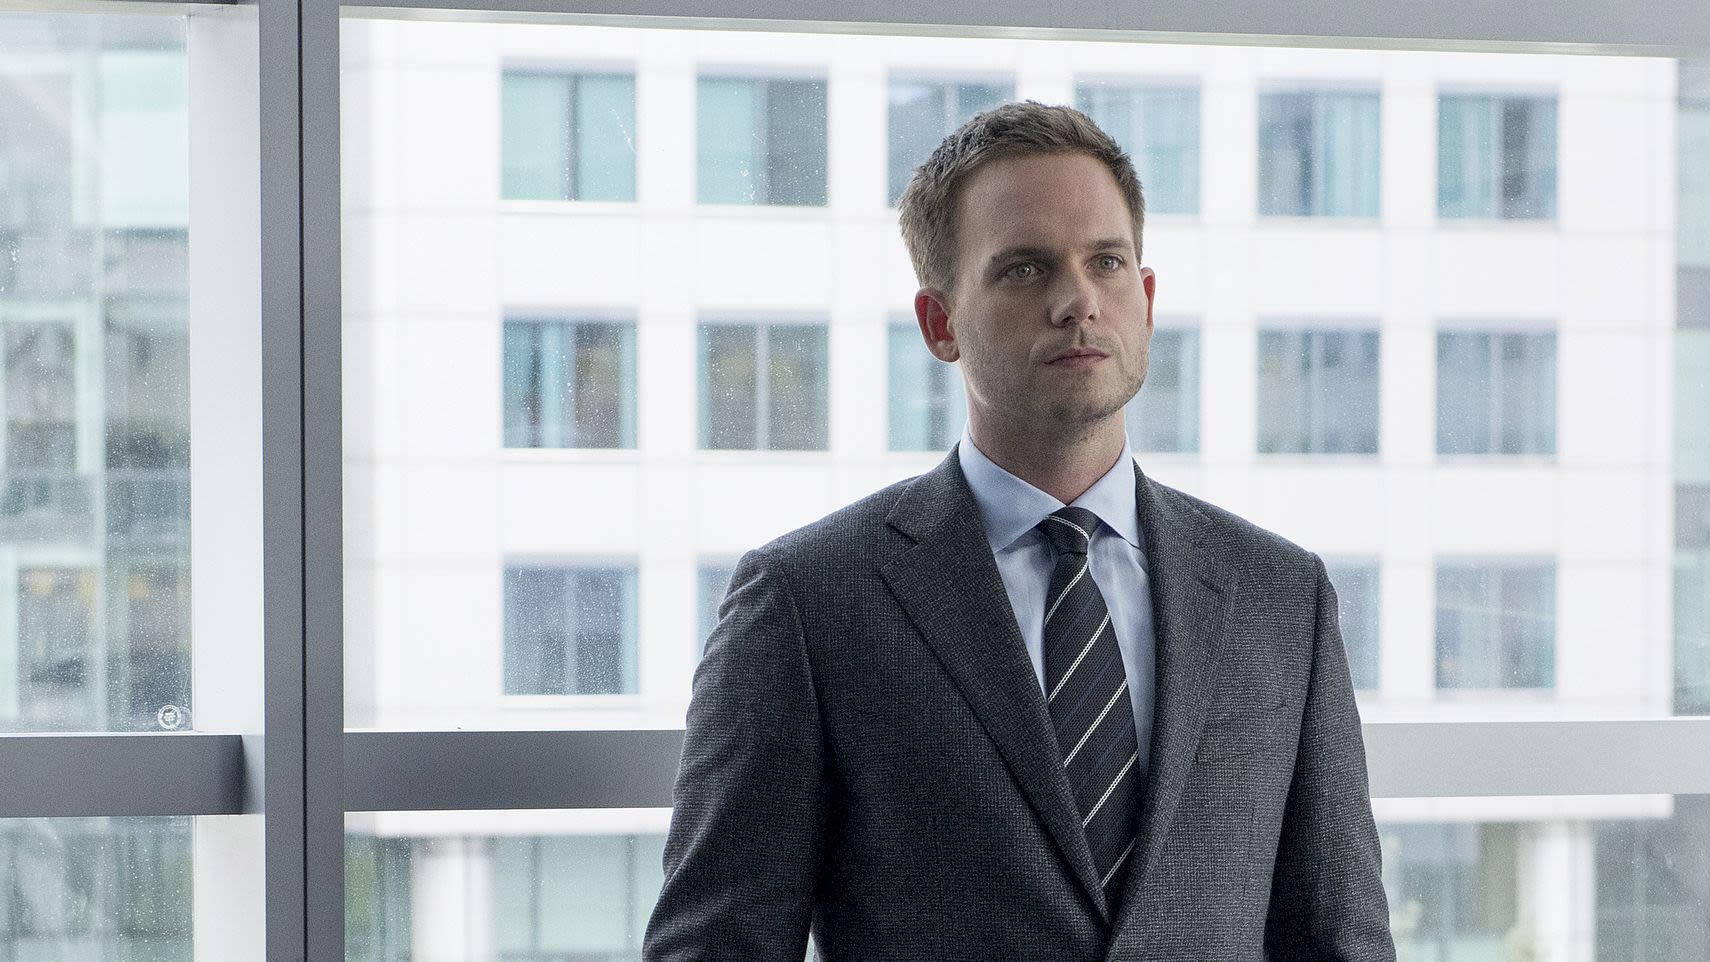 Case Closed, 'Suits' Fans — Season 9 Is Officially Coming to Netflix